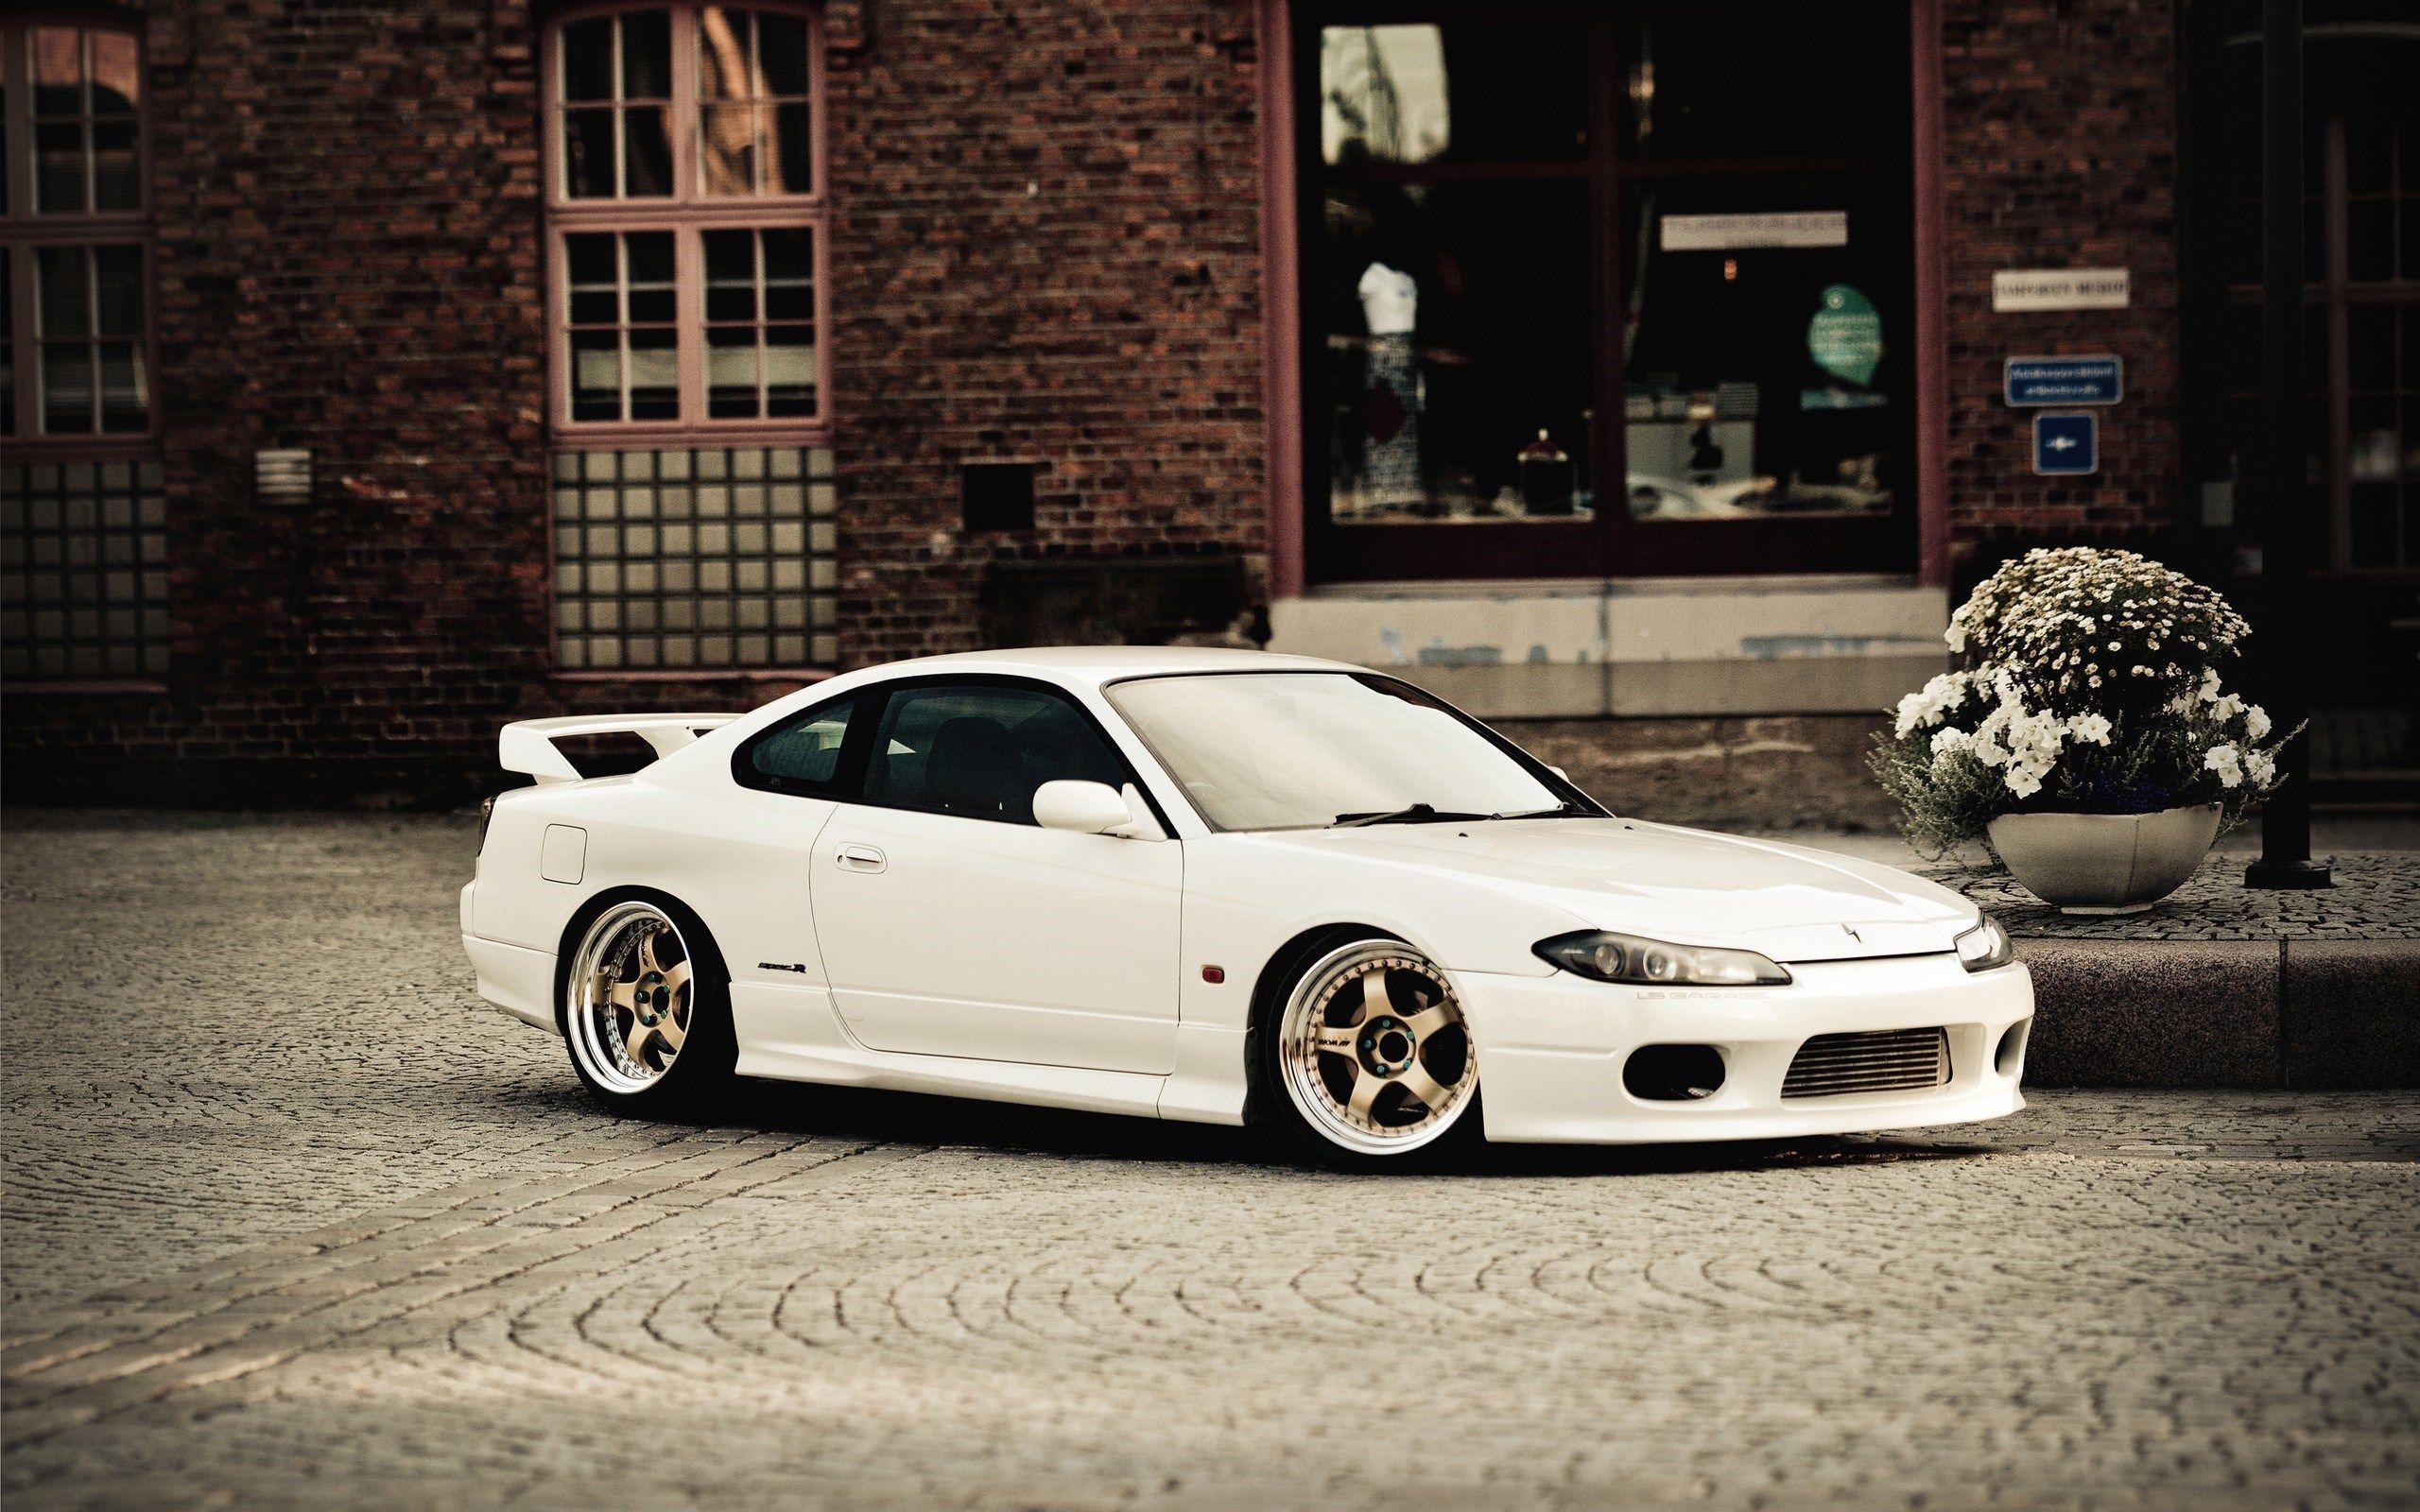 Nissan Silvia S15 in Front of Store Pavement HD Wallpaper